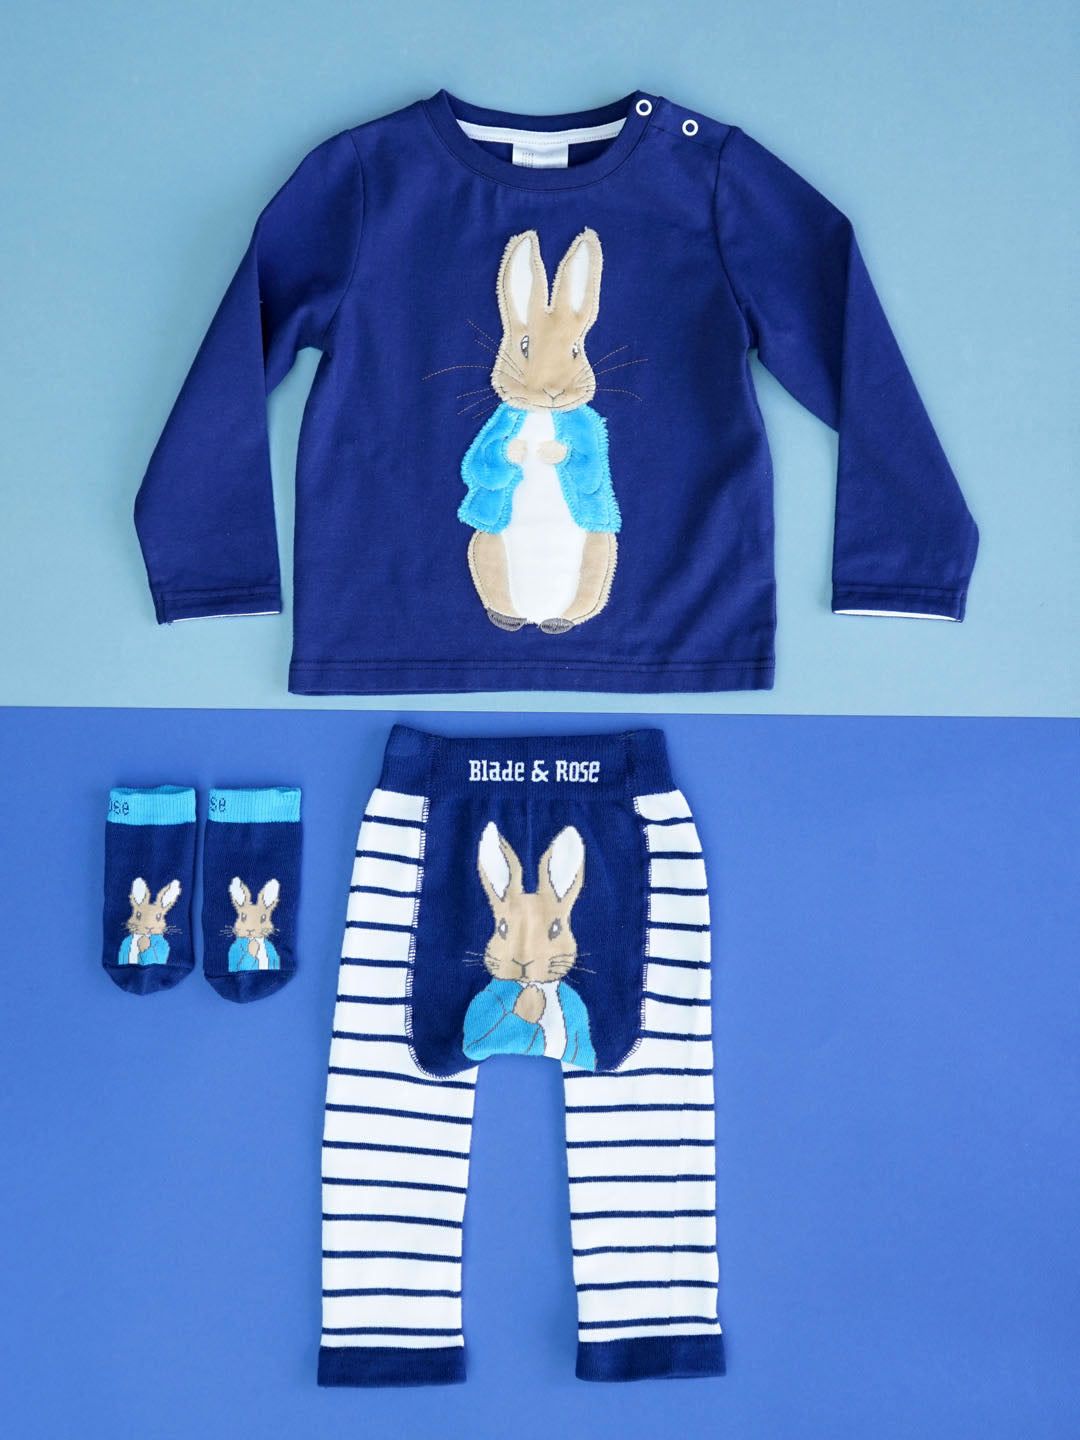 blade & rose peter rabbit outfit at whippersnappersonline